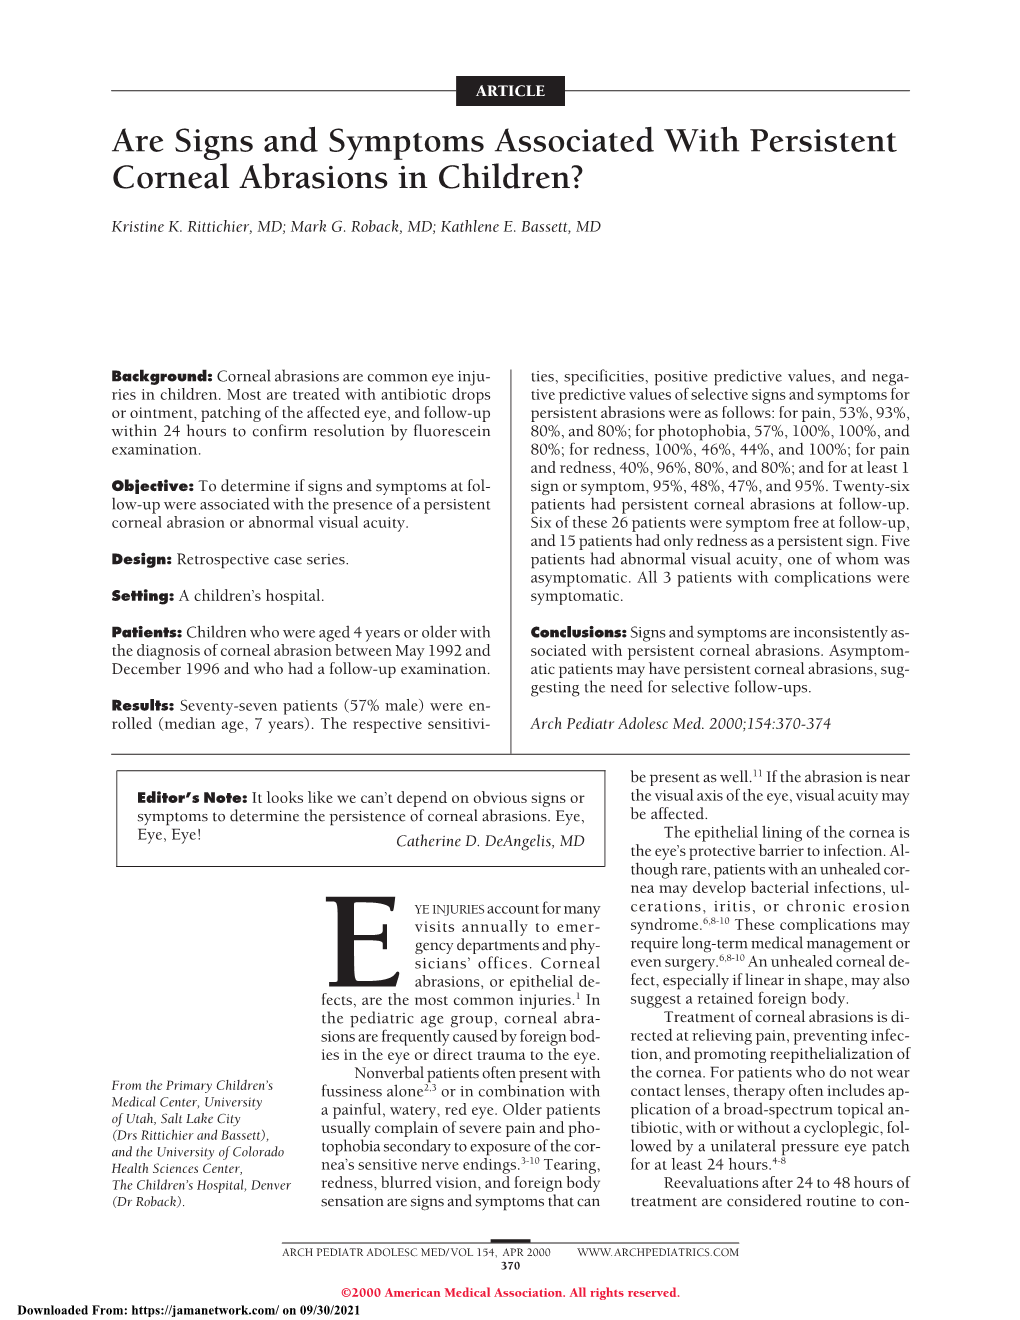 Are Signs and Symptoms Associated with Persistent Corneal Abrasions in Children?